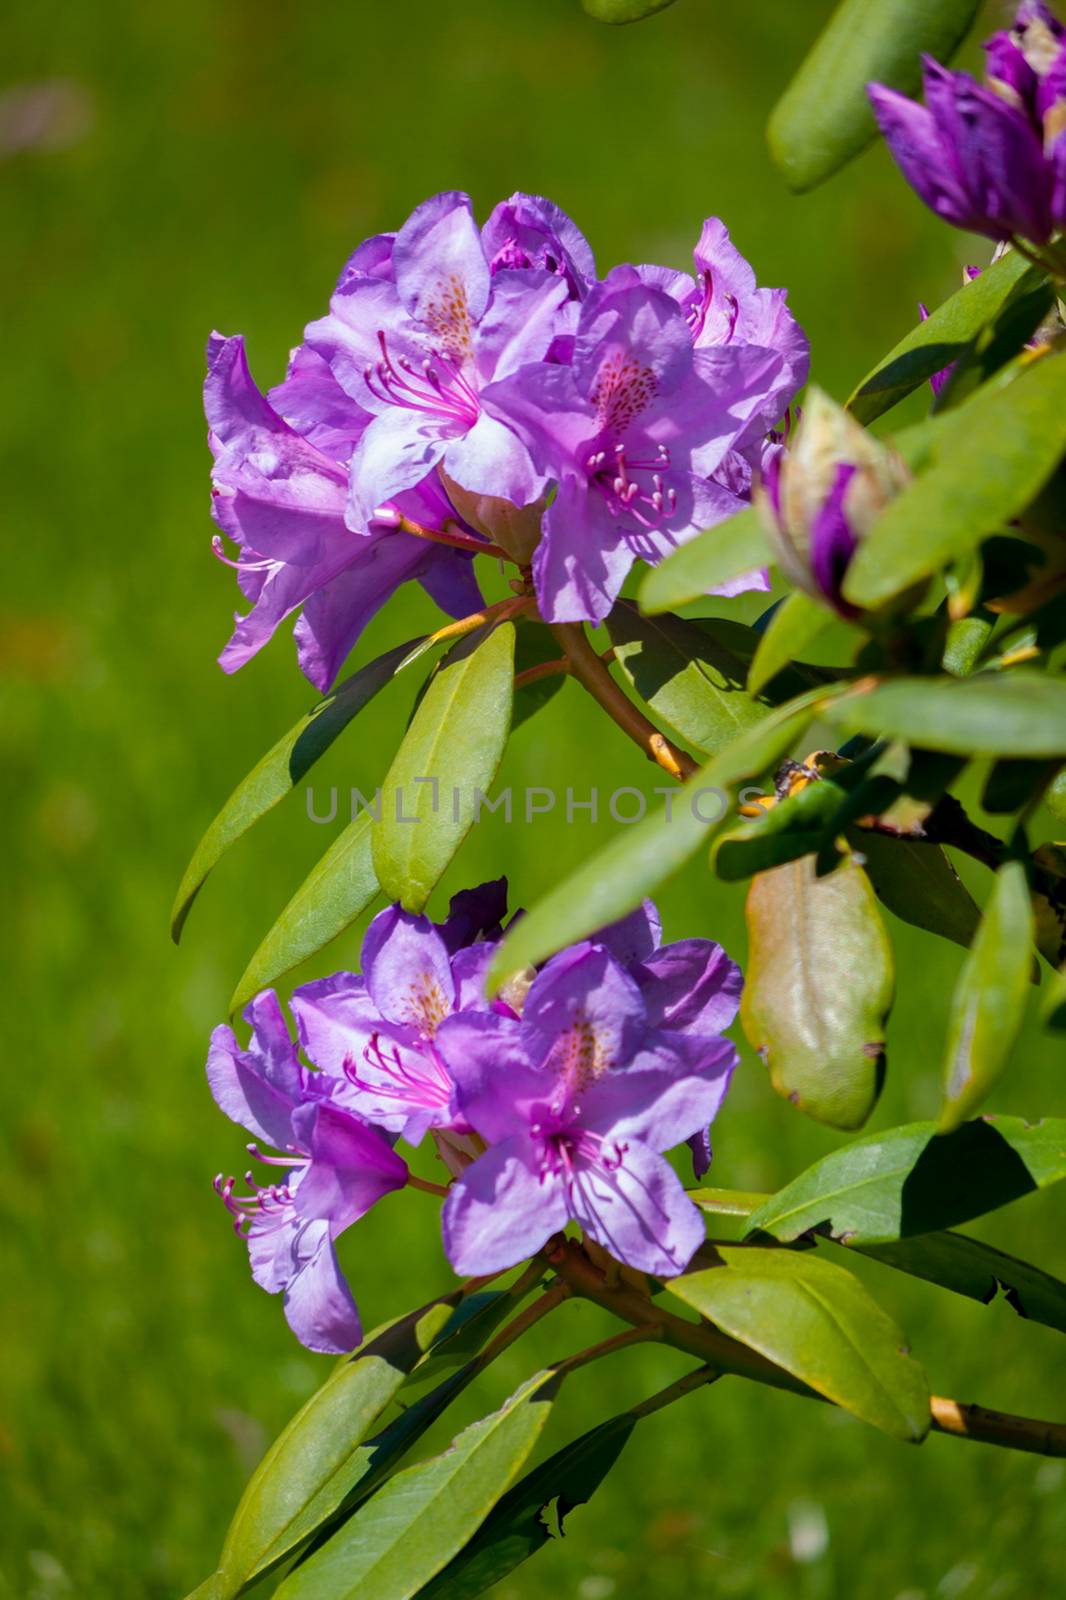 The tree blossomed lilac flowers with five petals. Among the green, juicy leaves